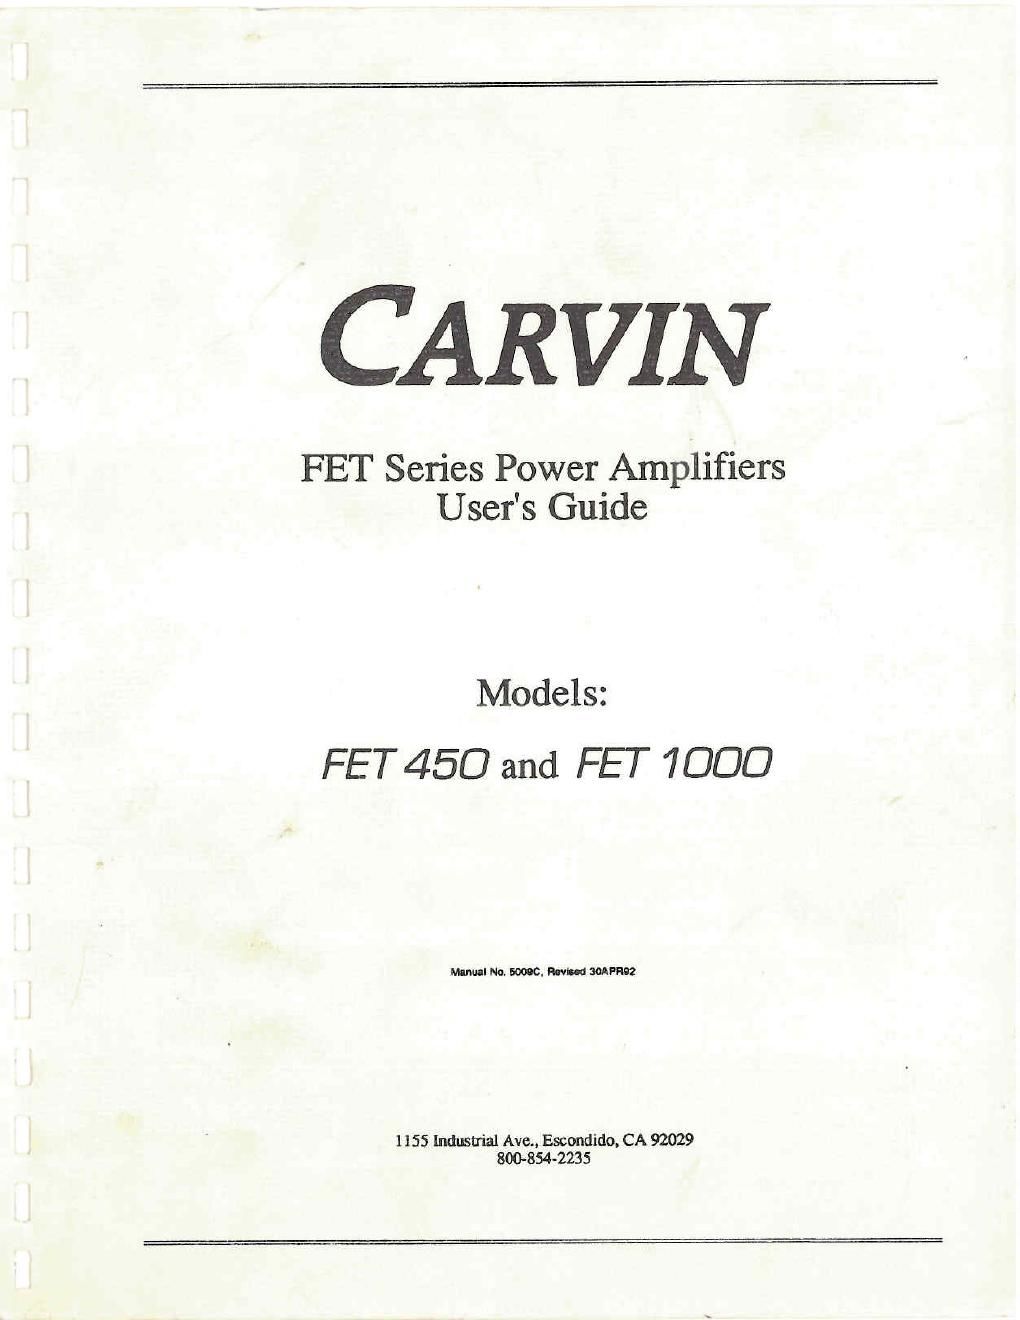 carvin fet 1000 owners manual